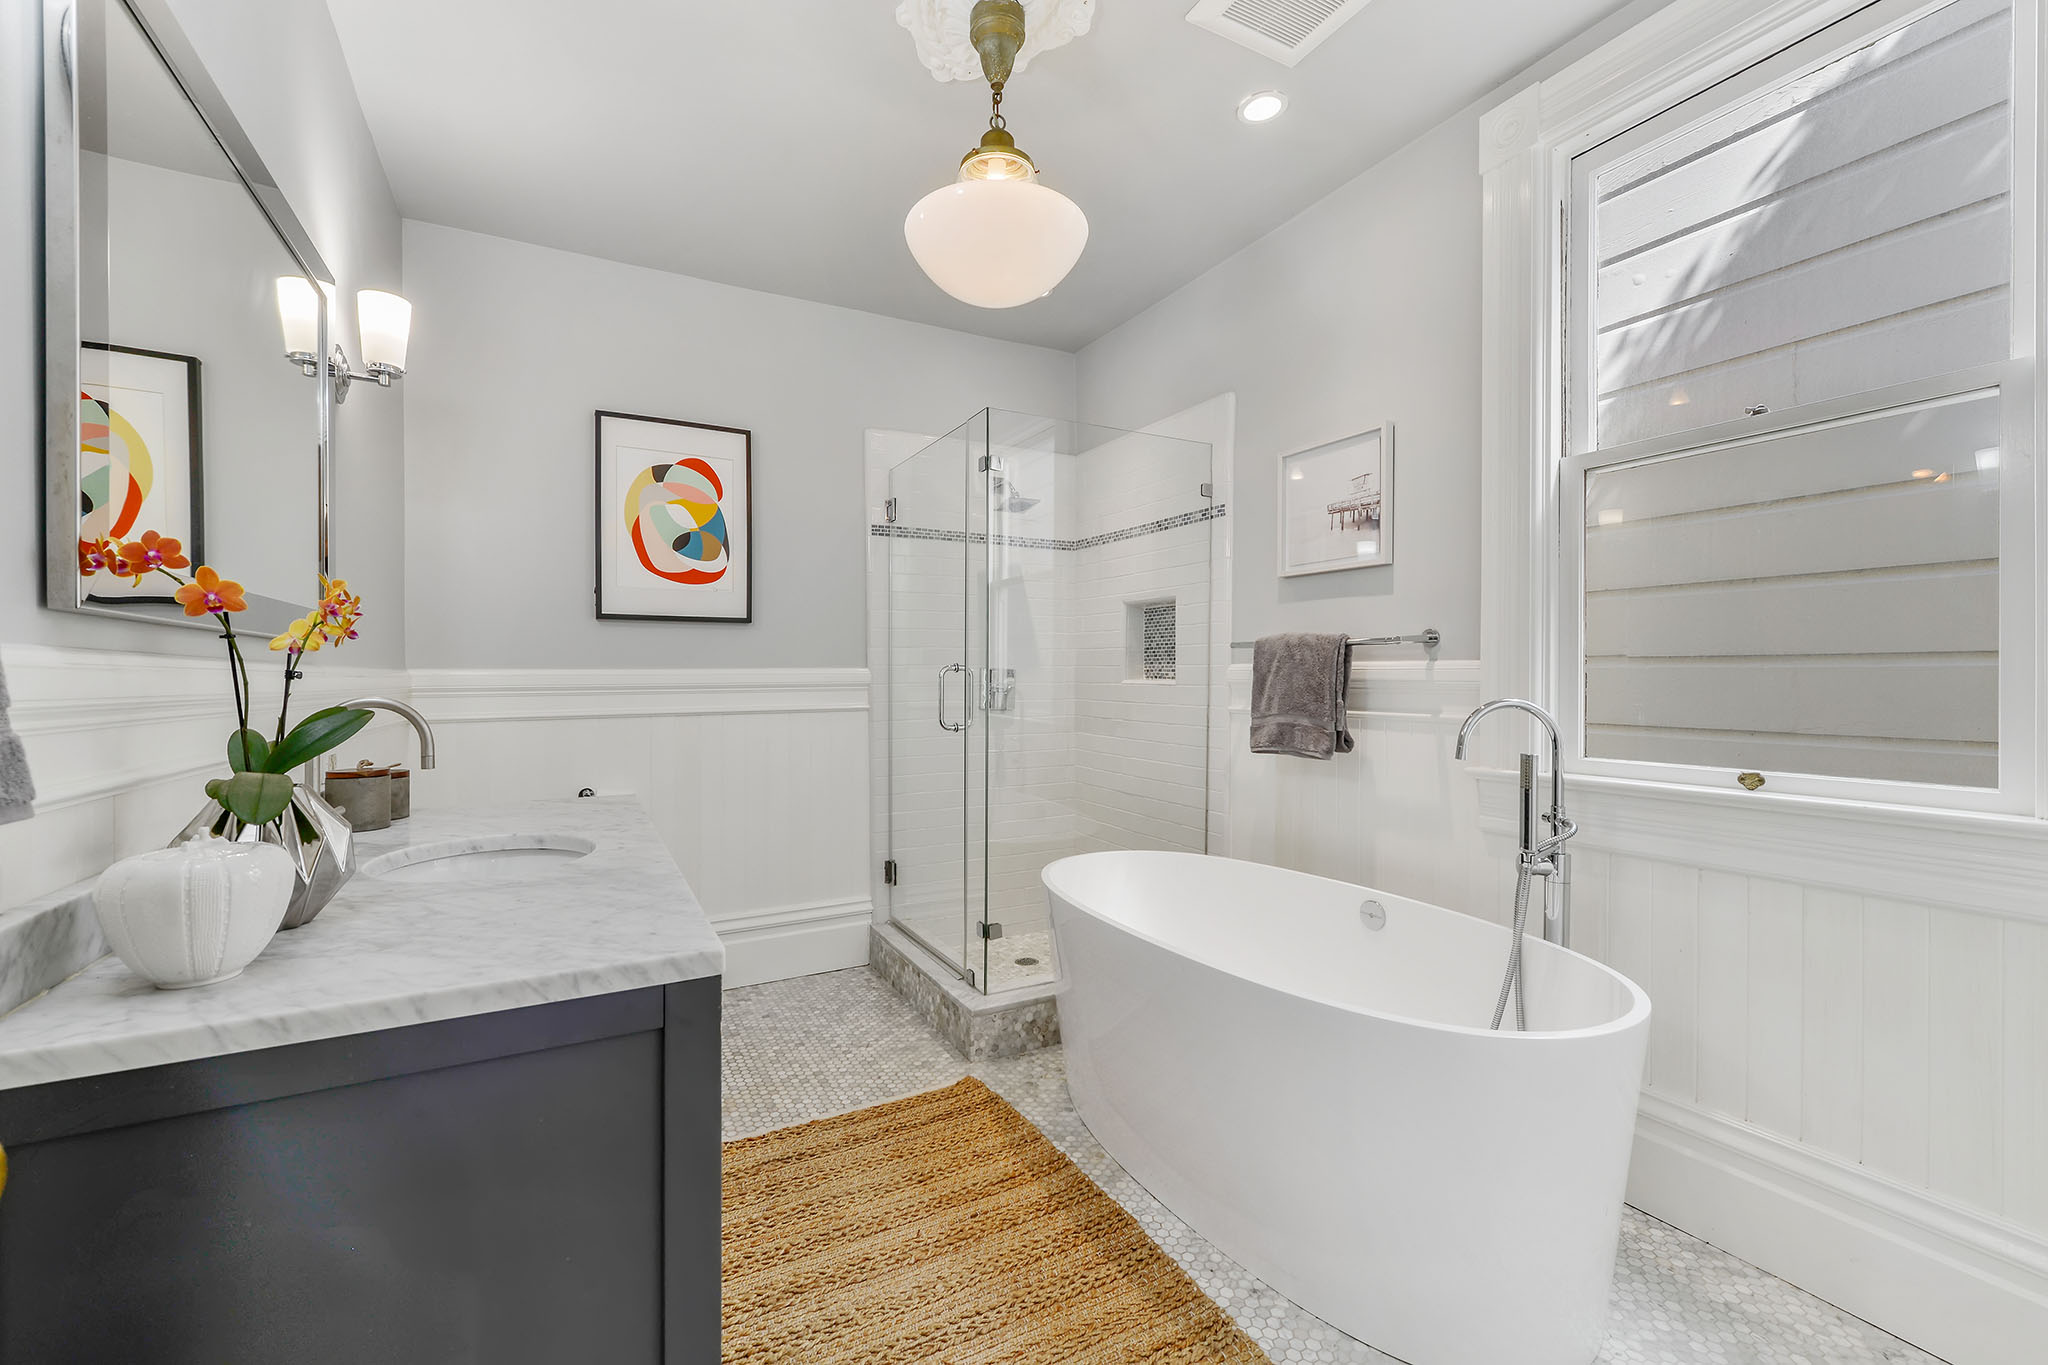 Property Photo: Bathroom with large free-standing tub